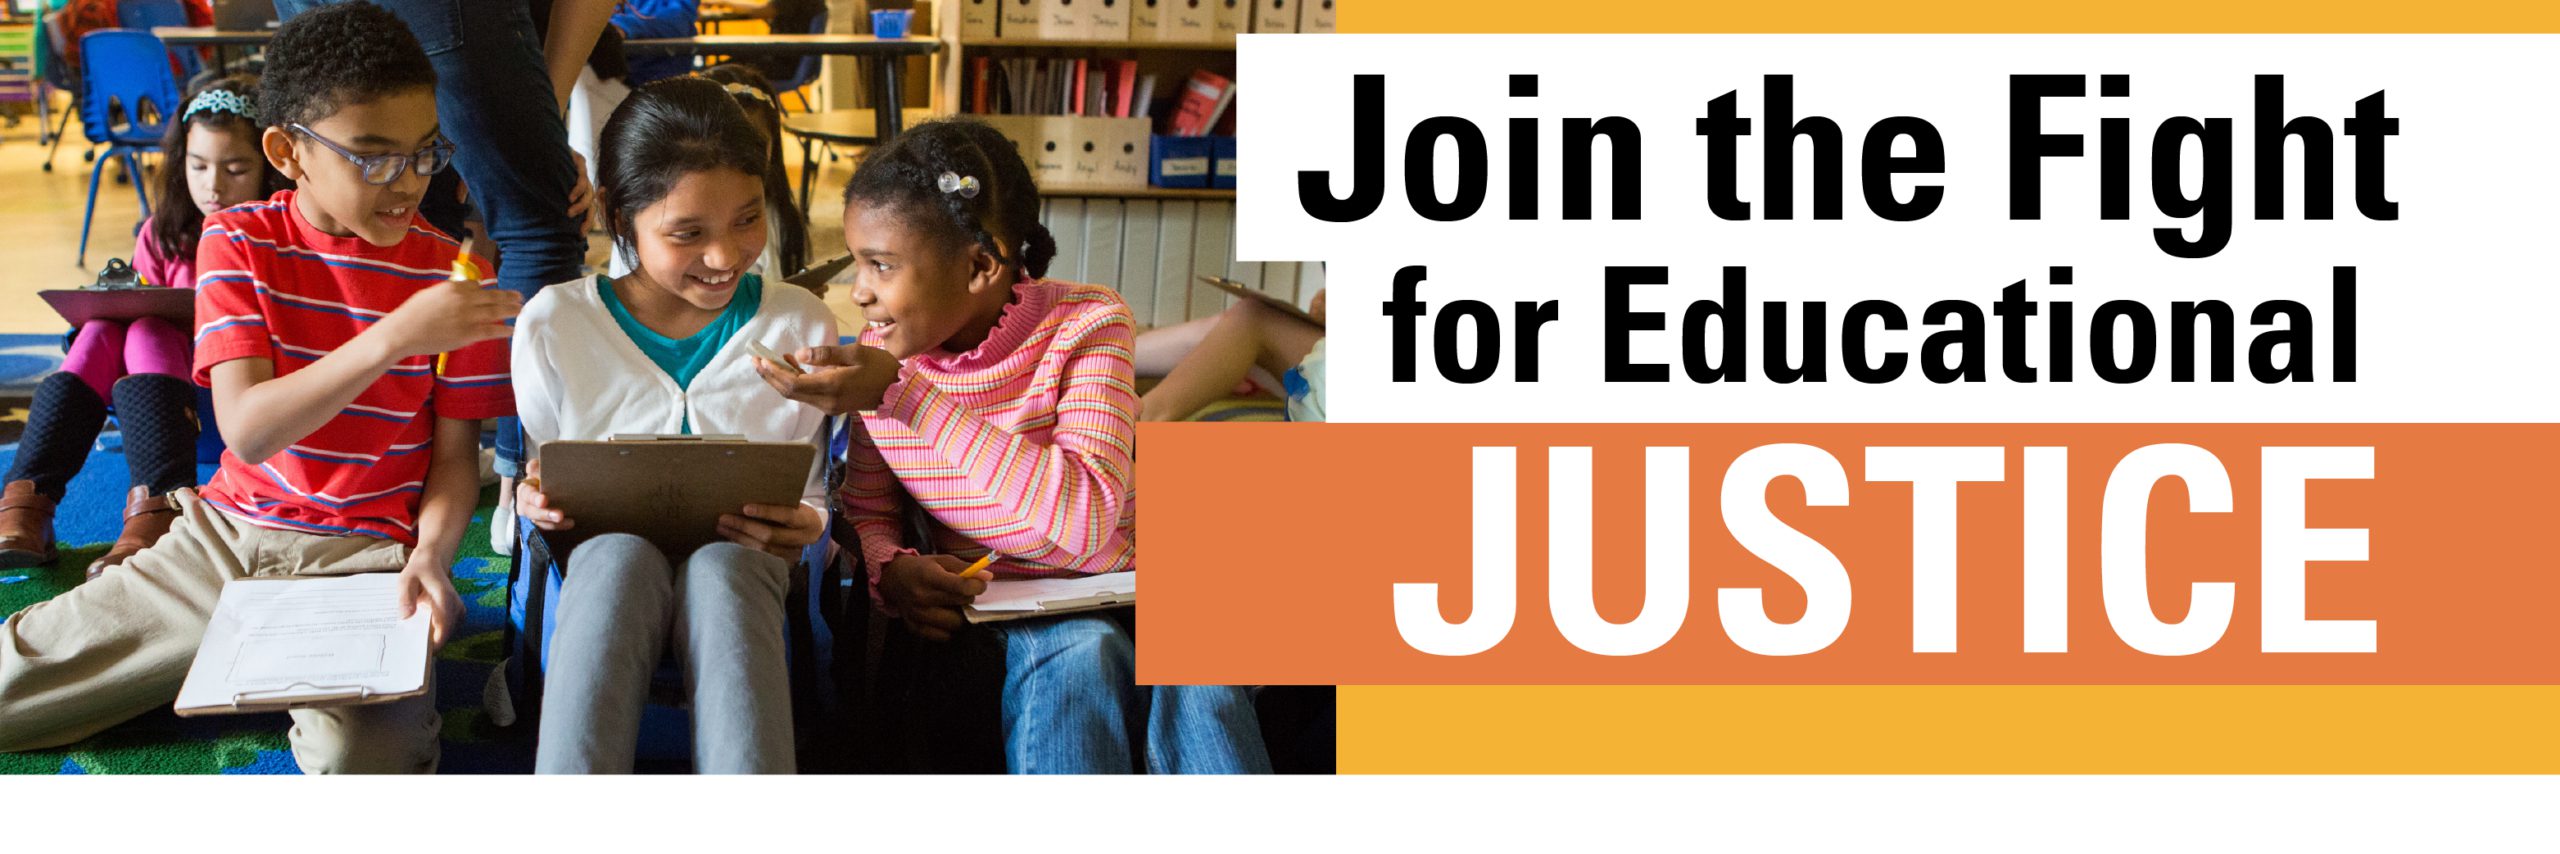 Graphic with 3 school age students clustered together that reads "Join the Fight for Educational Justice".